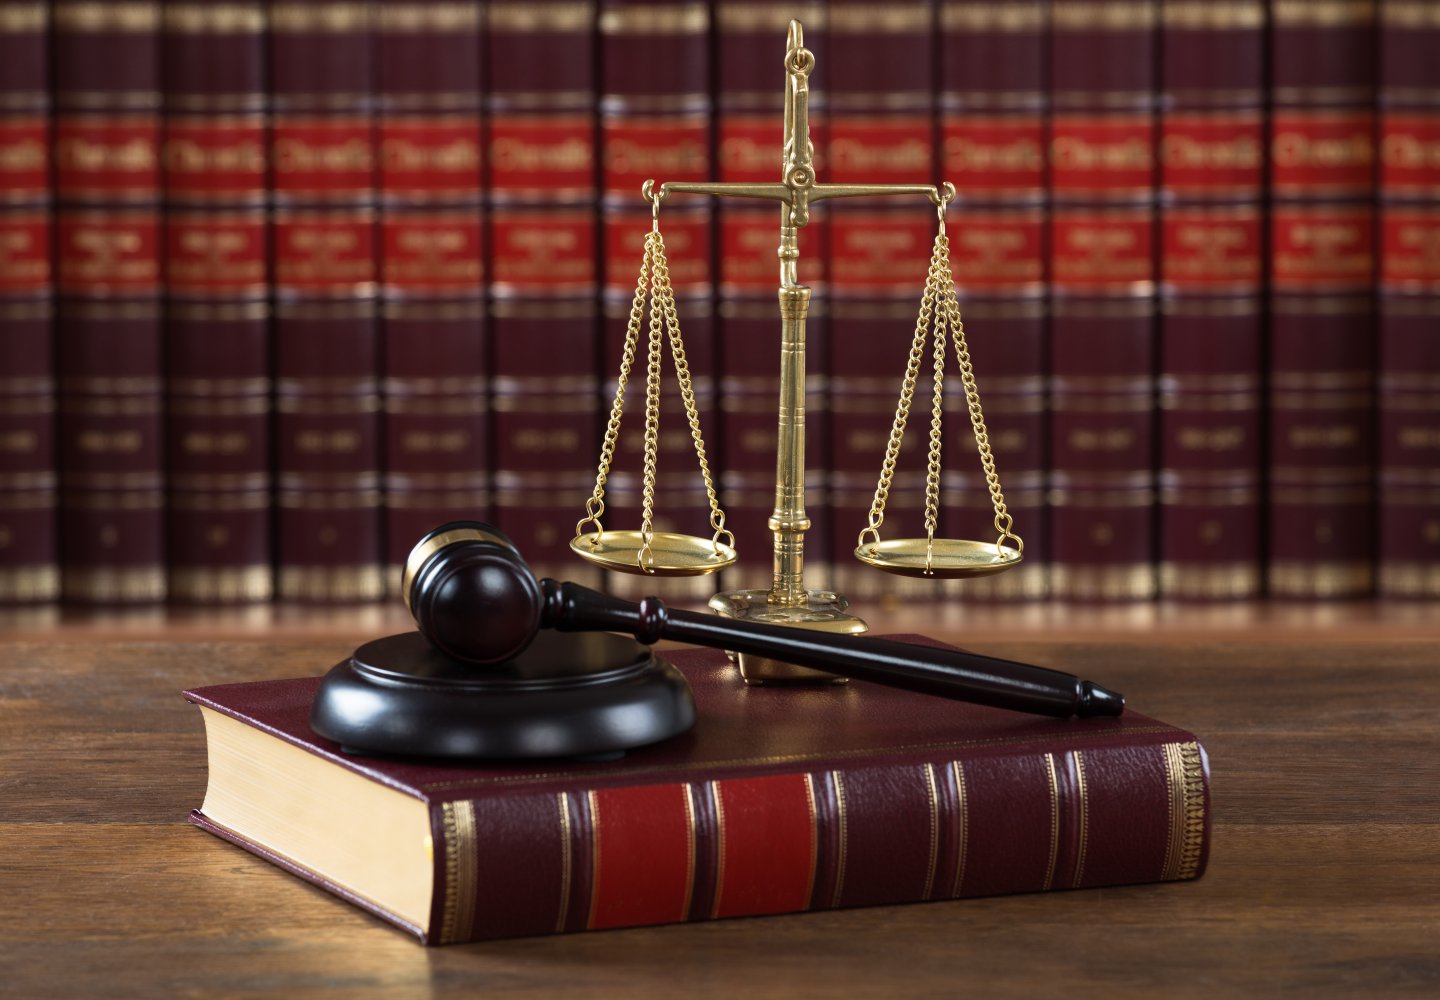 Mallet And Legal Book With Justice Scale On Table